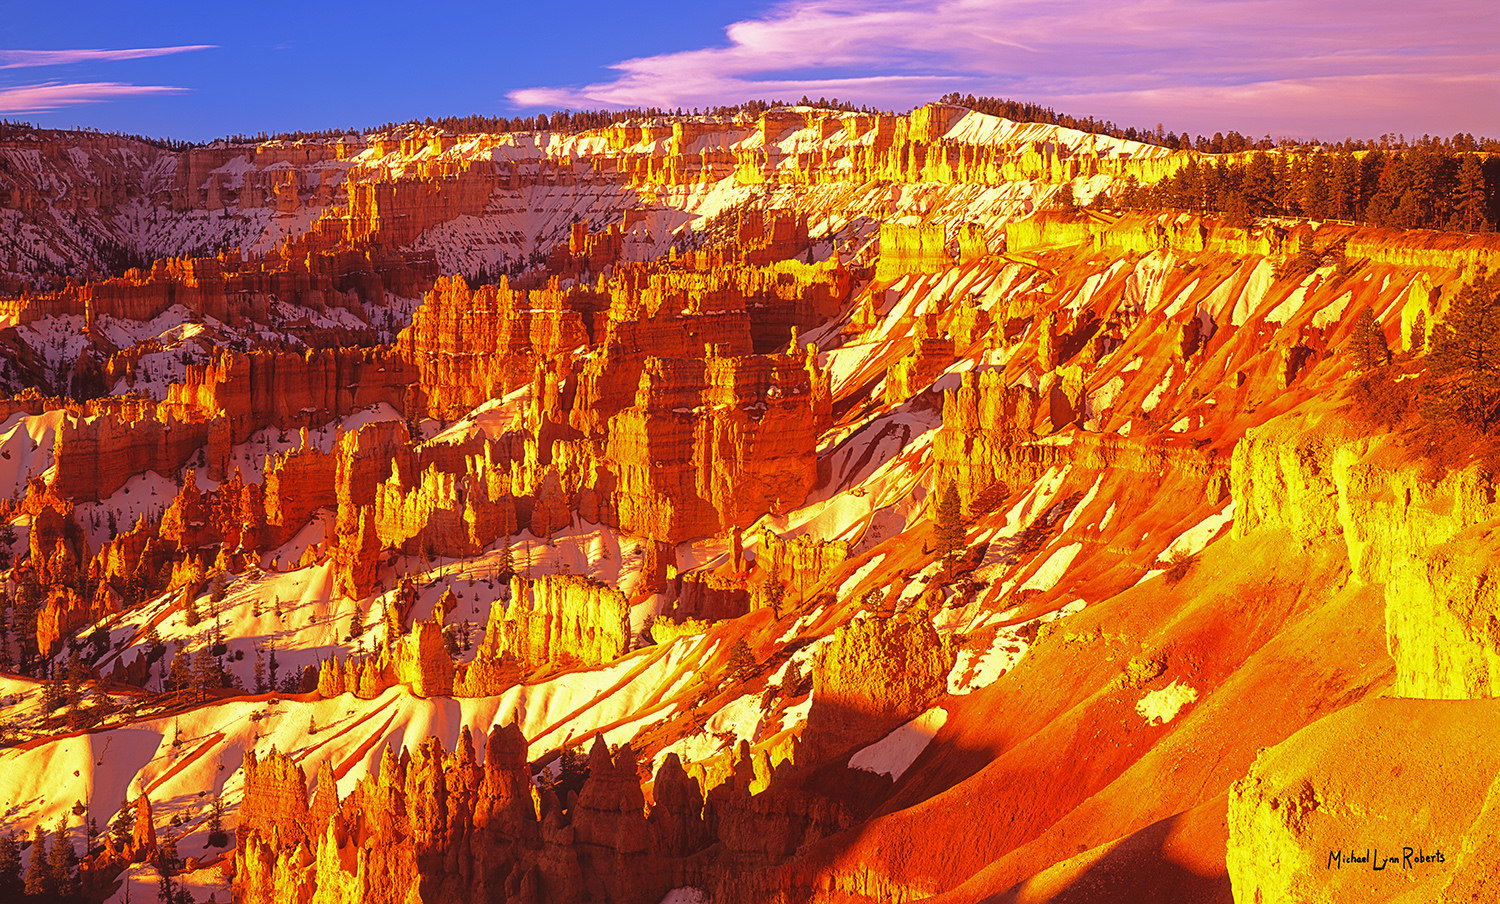 Bryce Canyon is one of the most amazing places in the American Southwest. The hoodoos are fantastical shapes, and under the right...